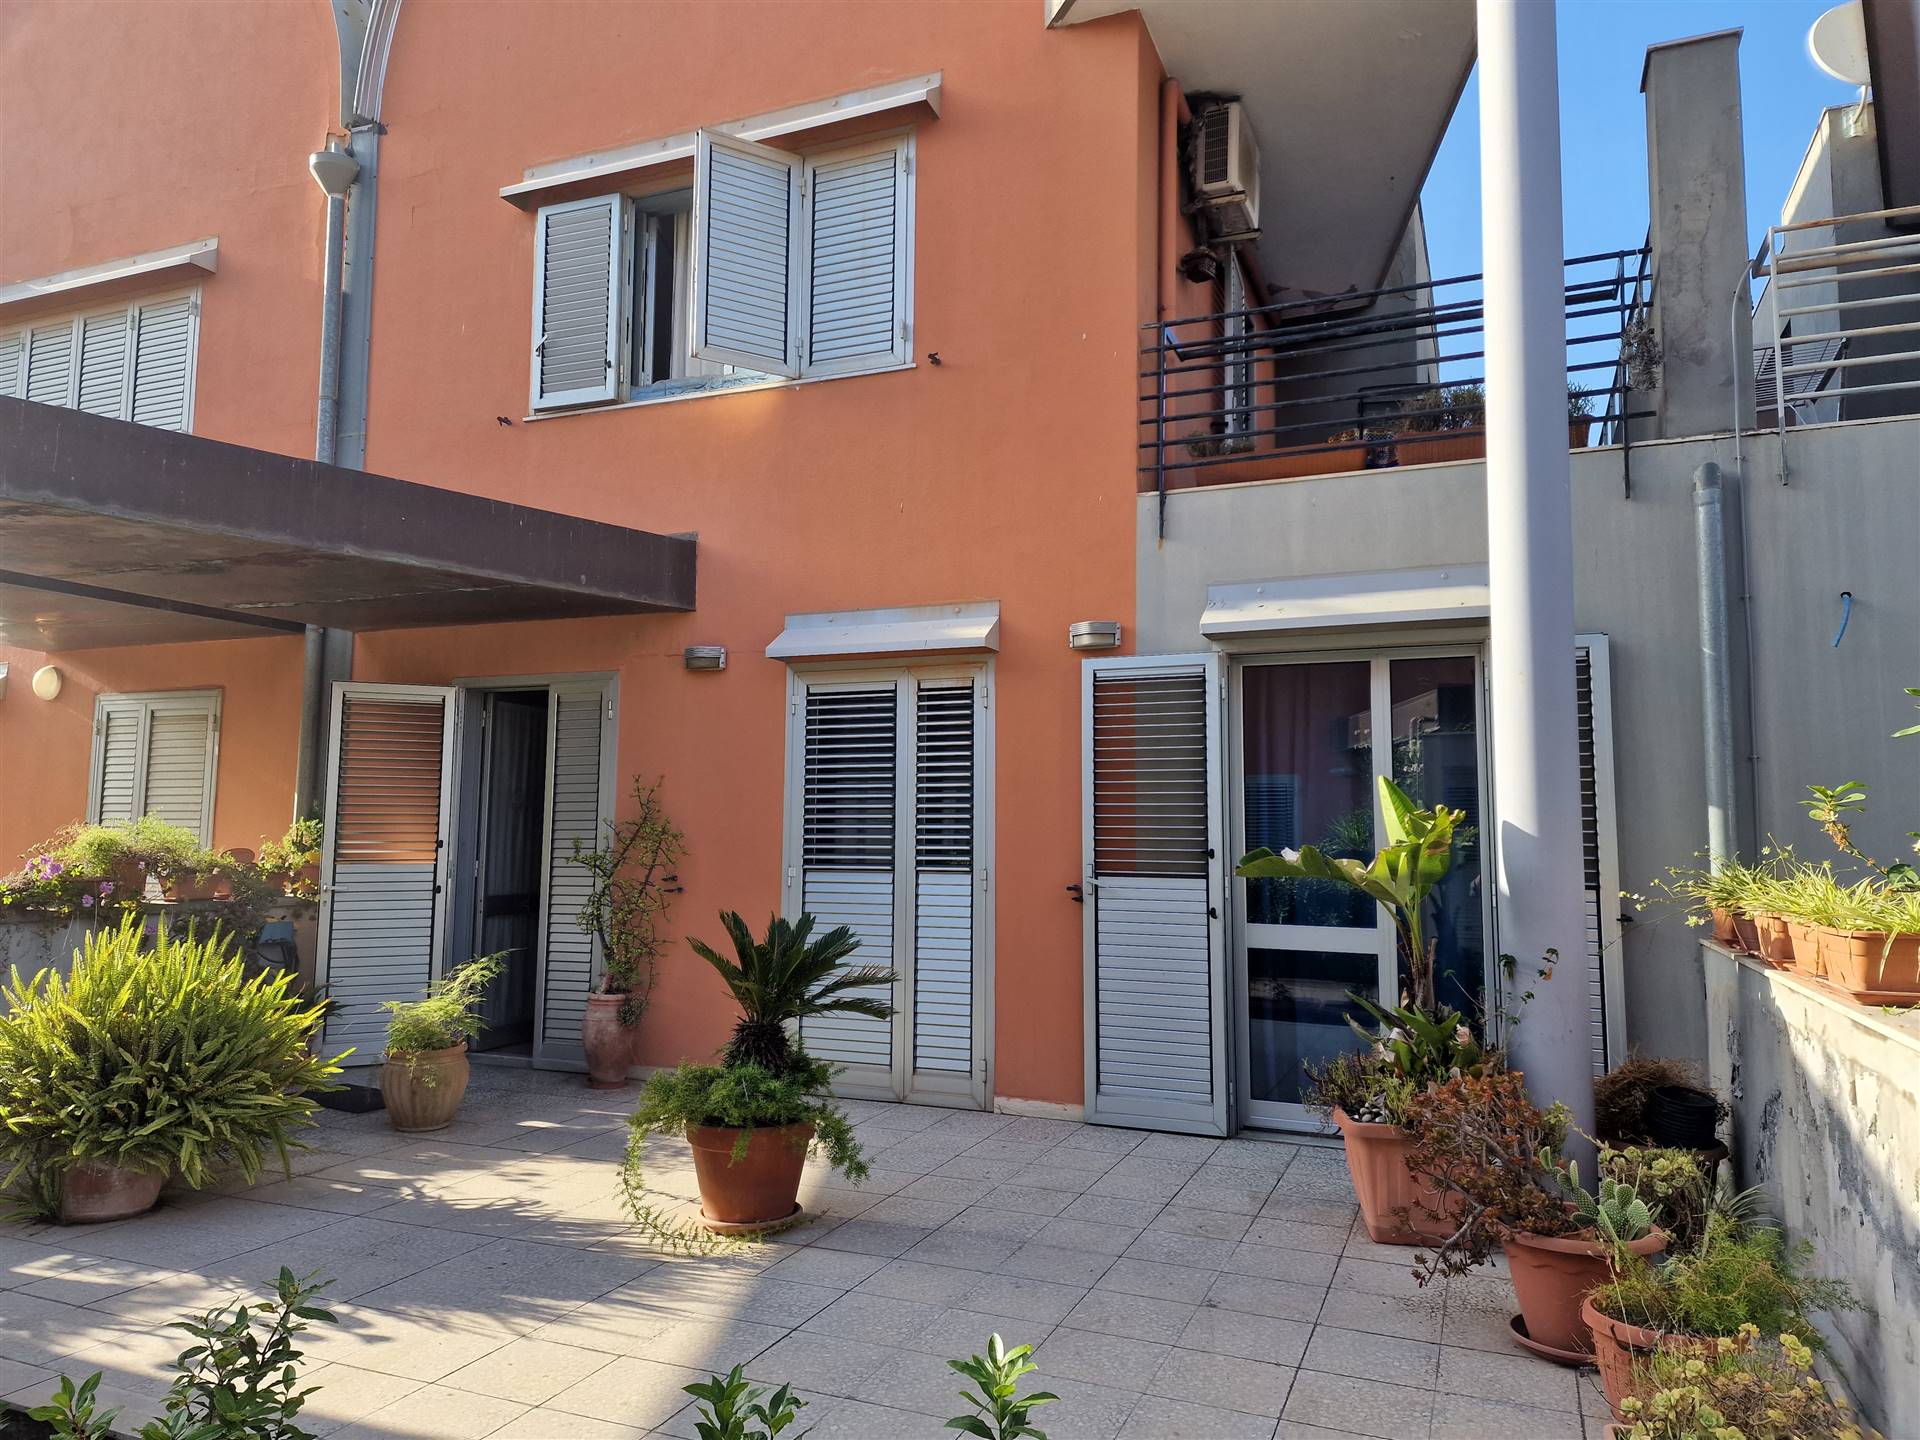 NUNZIATA, MASCALI, Terraced villa for sale of 130 Sq. mt., Good condition, Heating Individual heating system, Energetic class: G, placed at 2° on 2, 